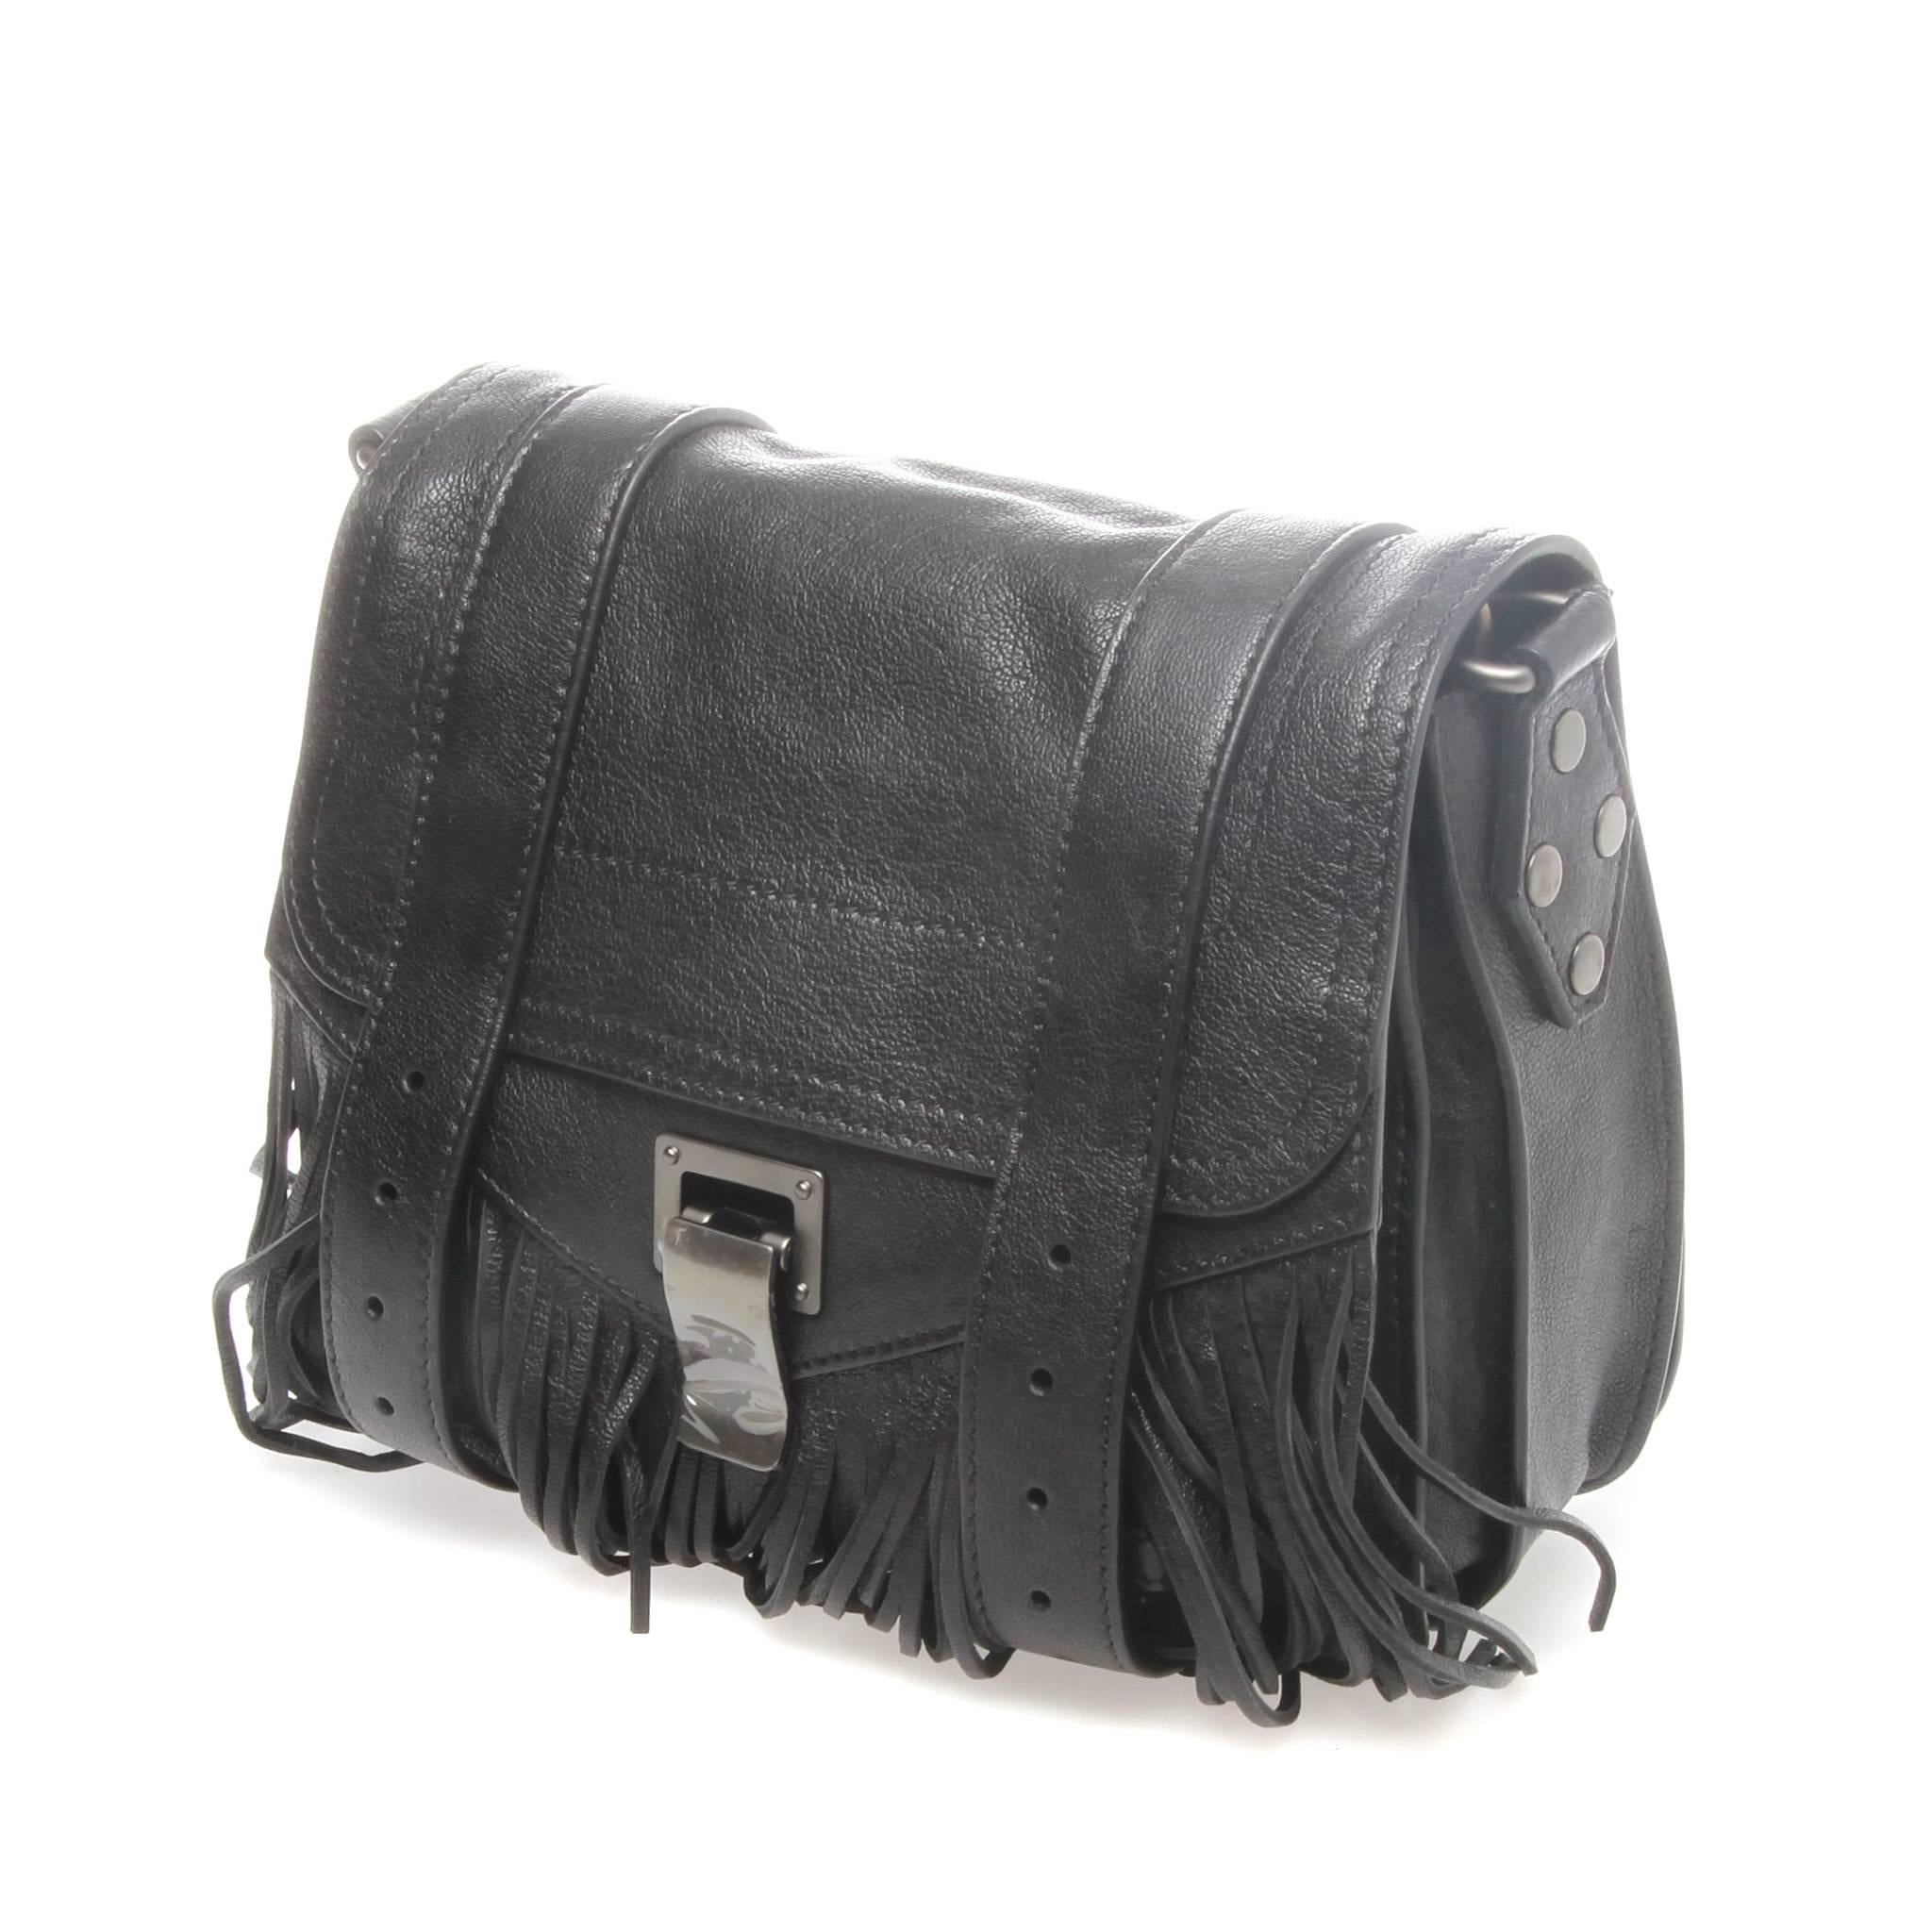 Proenza Schouler's iconic PS1 satchel tunes into a bohemian beat with this fringed leather iteration. Black leather Proenza Schouler PS1 mini crossbody bag with gunmetal hardware, detachable flat shoulder strap, single zip pocket at back, single